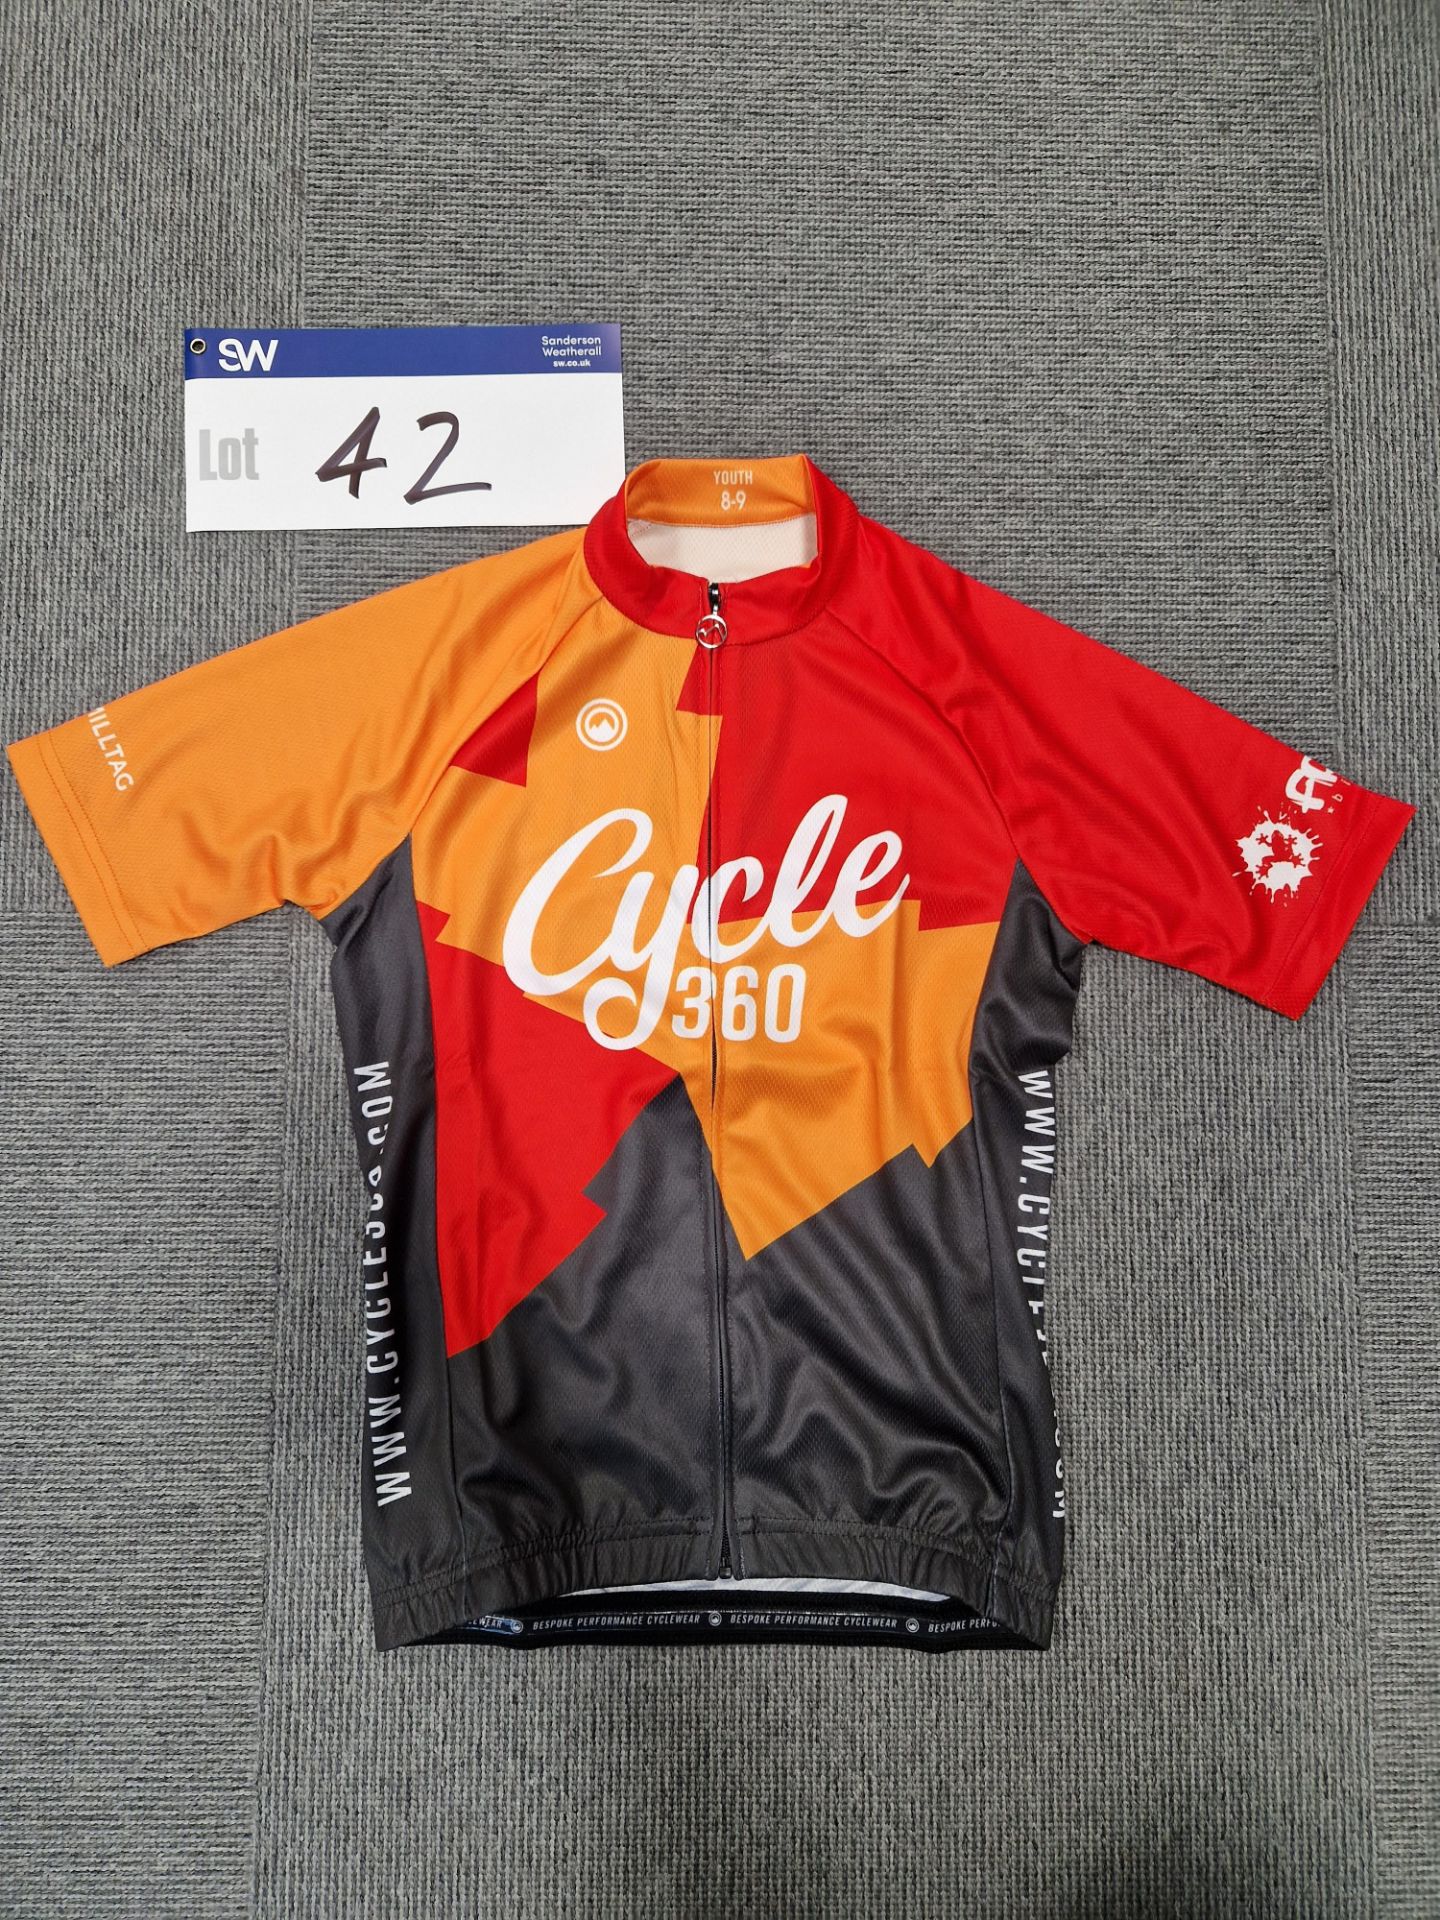 Youth's 8-9 Milltag Cycling Jersey, Branded Cycle 360, 100% PolyesterPlease read the following